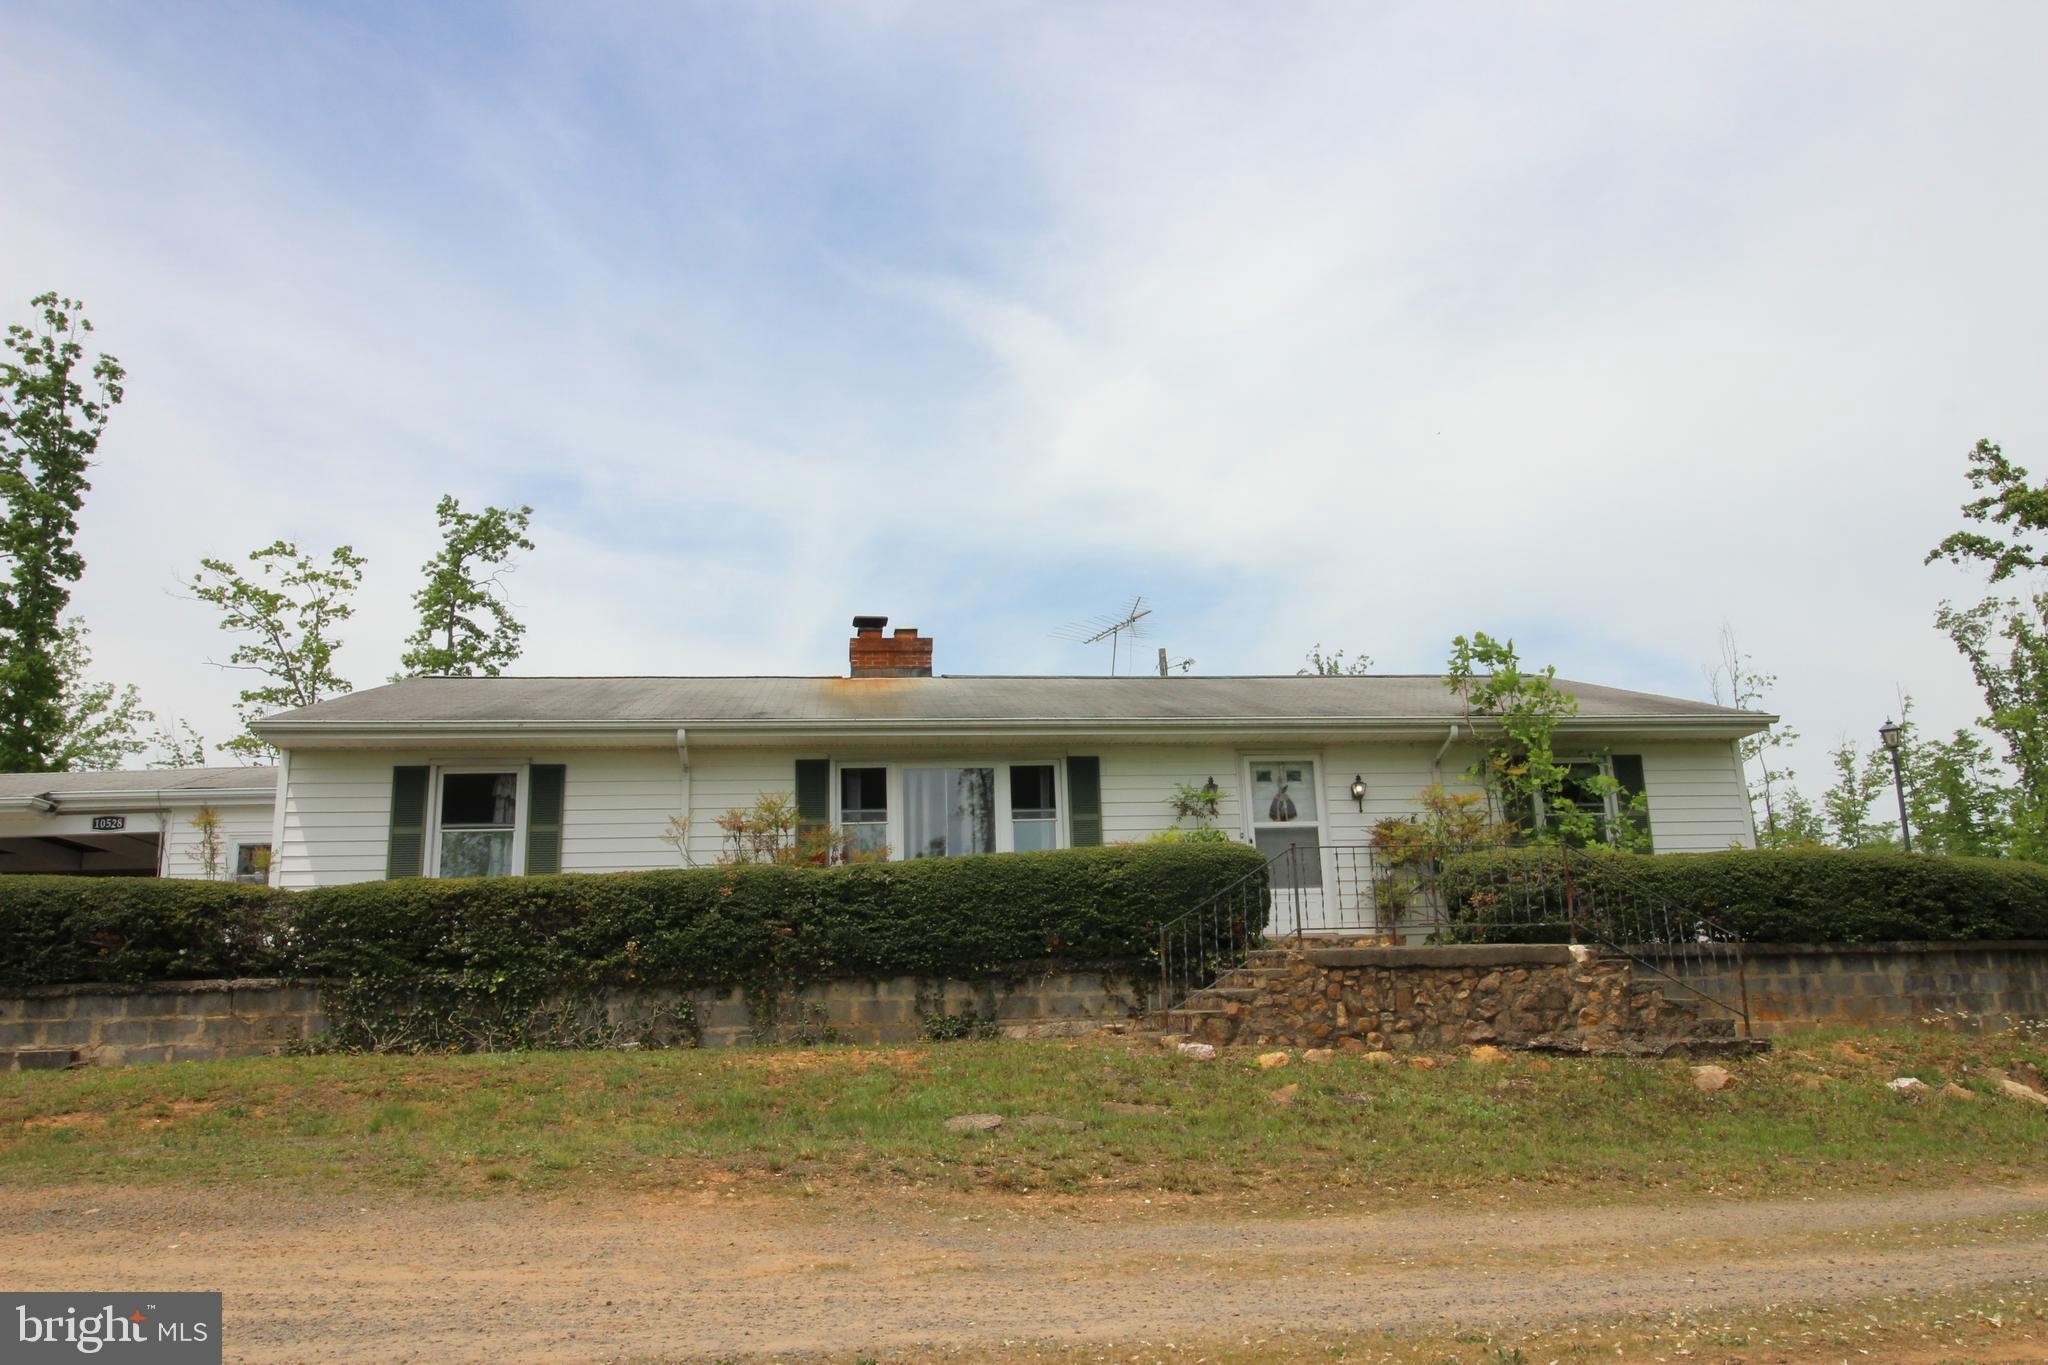 35. 10528 Pineview Road